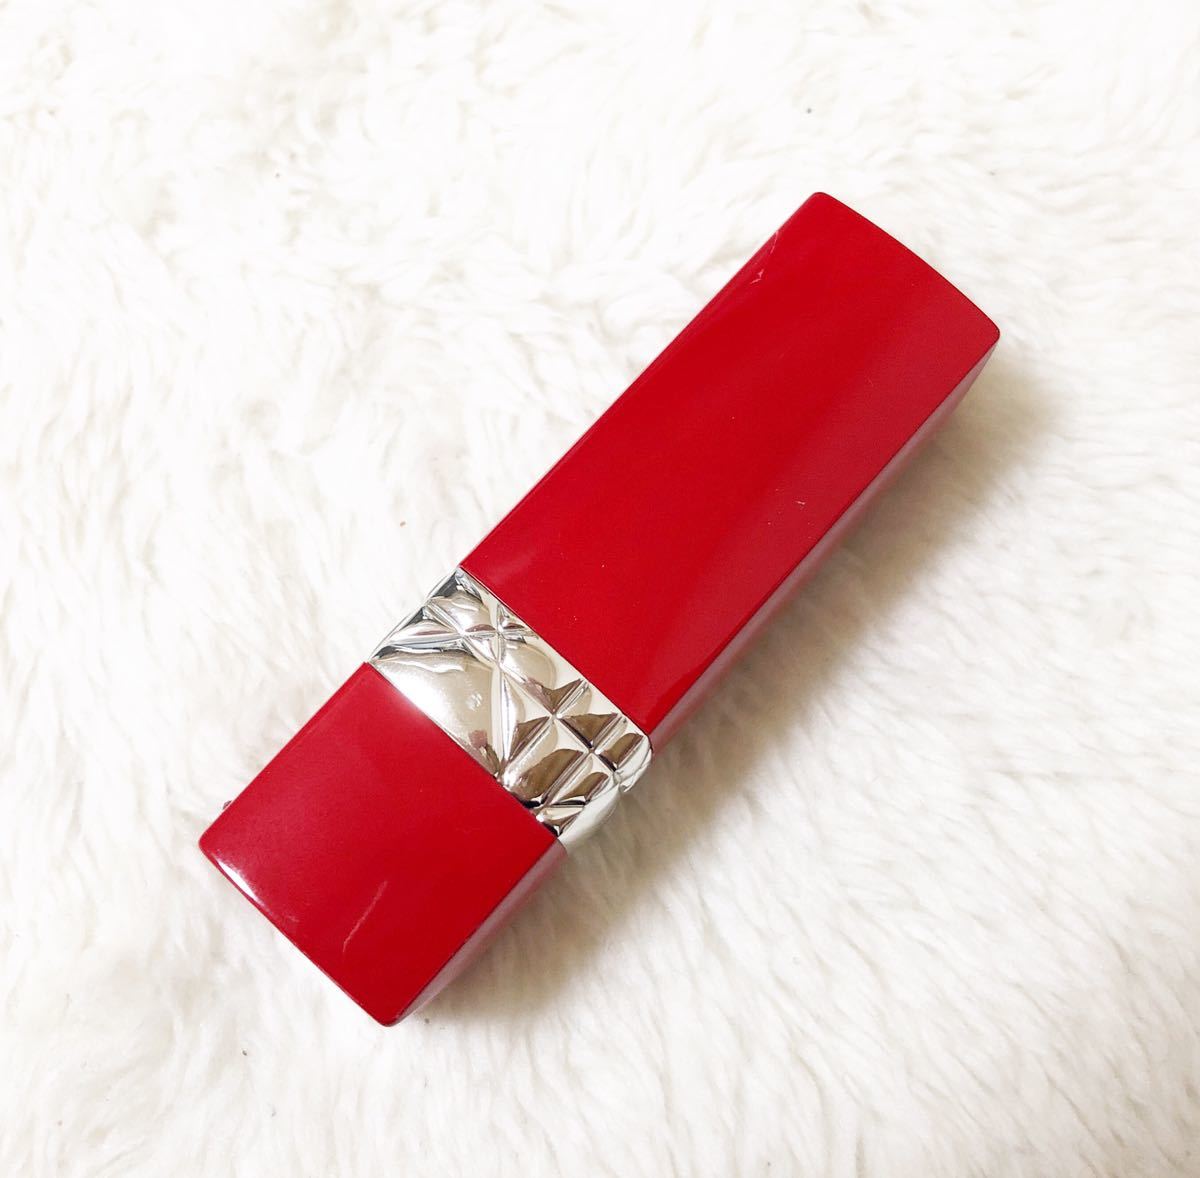  rouge Dior Ultra rouge 641 Ultra spice lipstick 